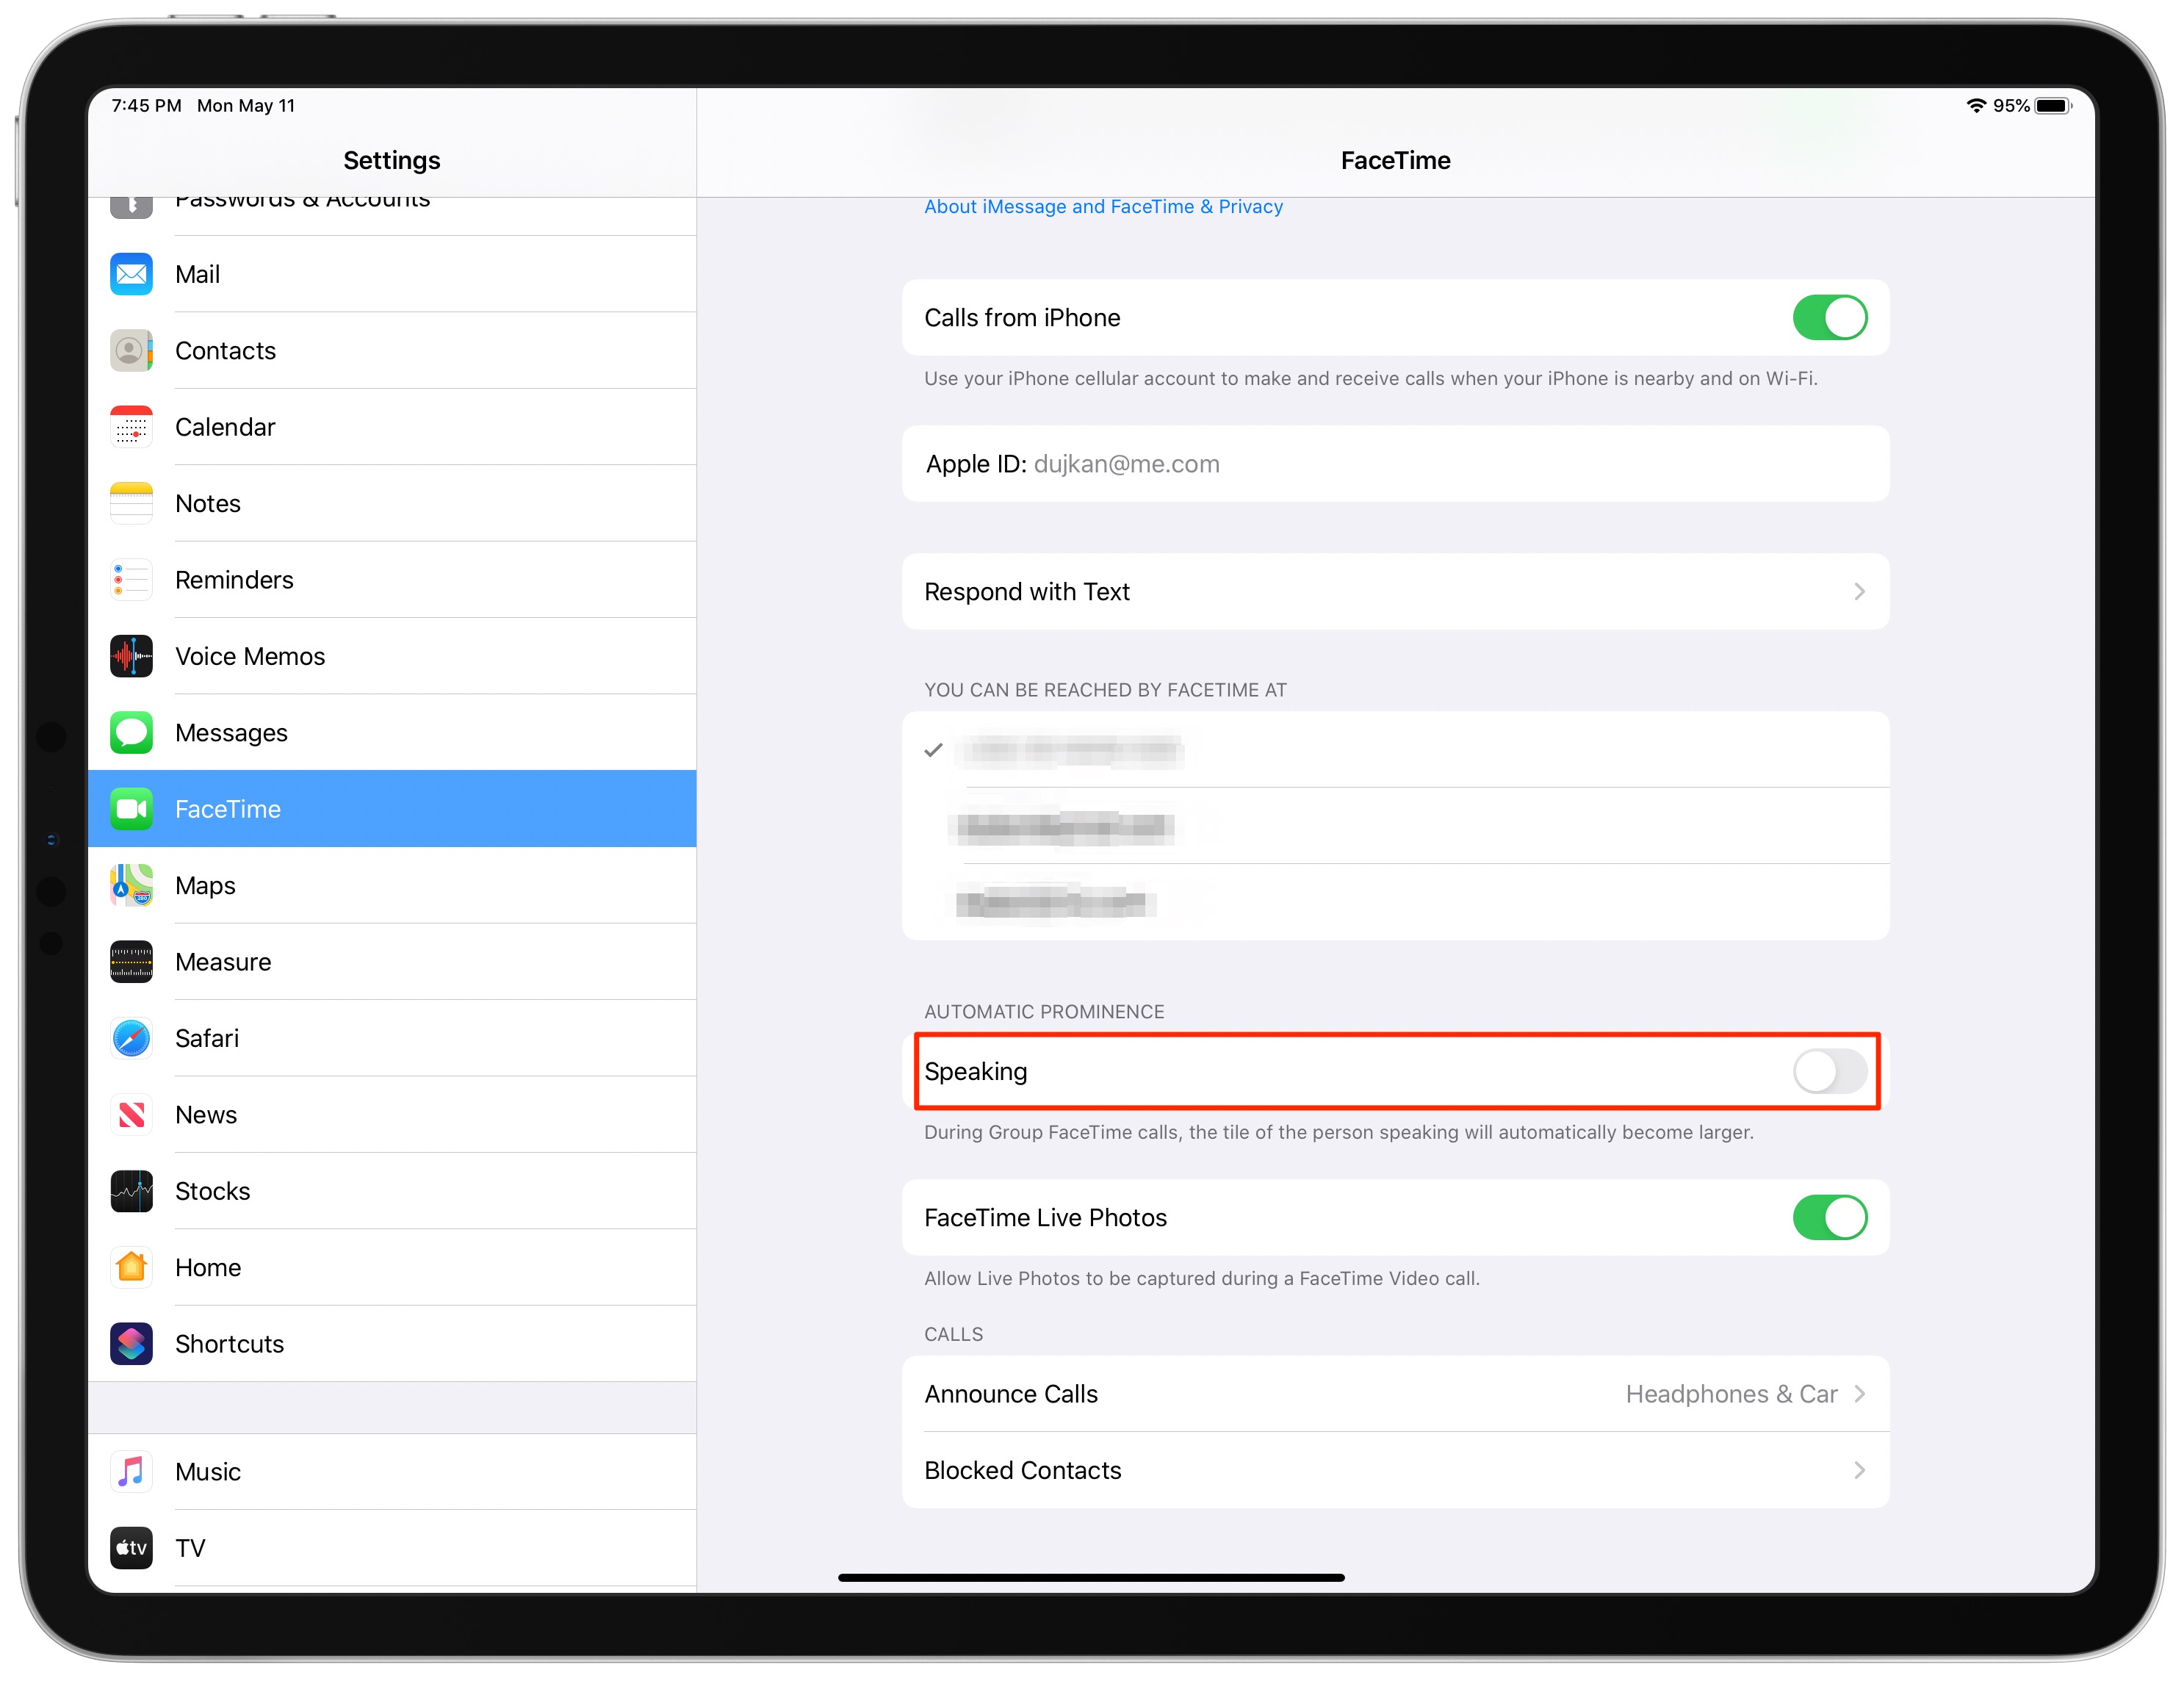 iOS 13.5 iPadOS Group FaceTime automatic prominence disabled